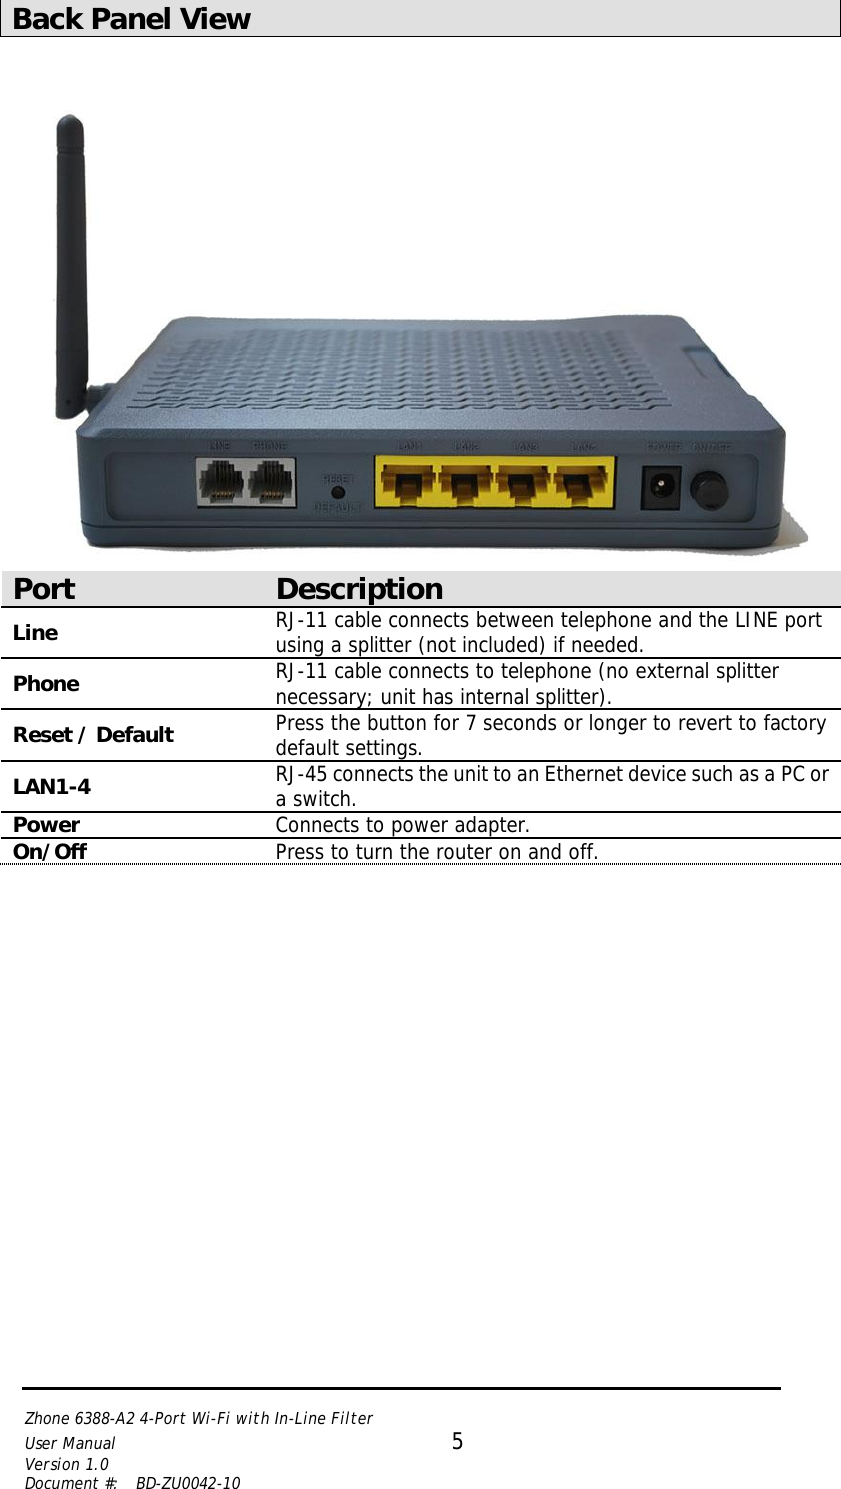   Zhone 6388-A2 4-Port Wi-Fi with In-Line Filter User Manual 5 Version 1.0 Document #:  BD-ZU0042-10    Back Panel View    Port  Description Line RJ-11 cable connects between telephone and the LINE port using a splitter (not included) if needed. Phone RJ-11 cable connects to telephone (no external splitter necessary; unit has internal splitter). Reset / Default Press the button for 7 seconds or longer to revert to factory default settings. LAN1-4 RJ-45 connects the unit to an Ethernet device such as a PC or a switch. Power Connects to power adapter. On/Off Press to turn the router on and off.   